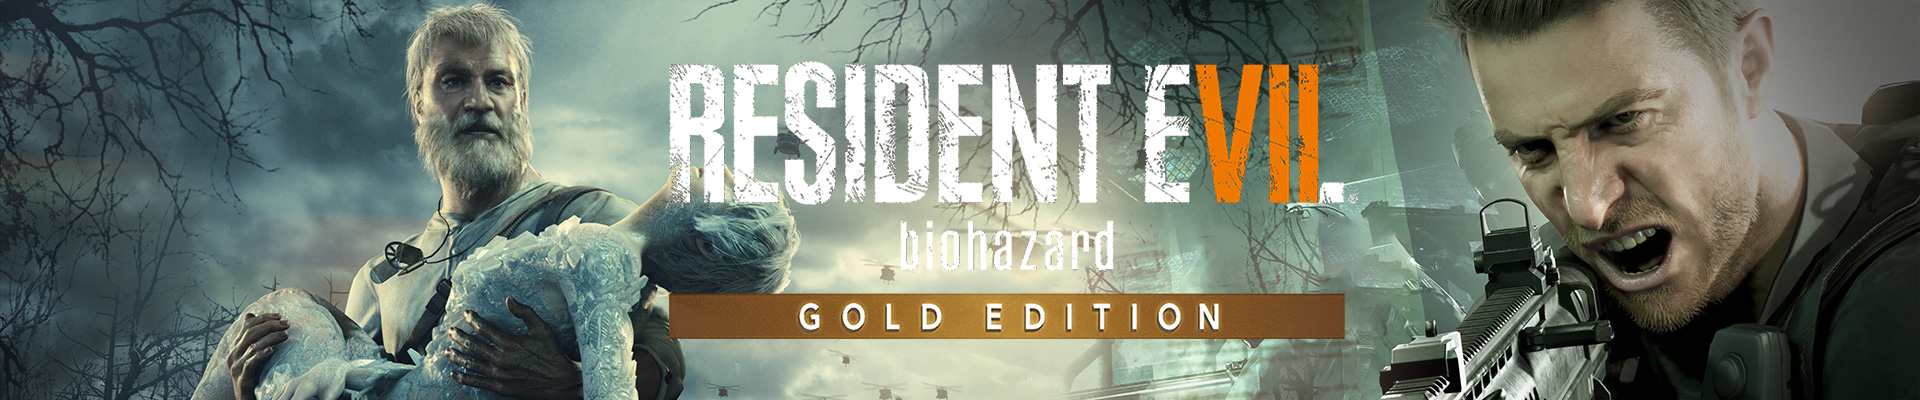 Thoughts on: Resident Evil 7. Gold Edition. The DLCs